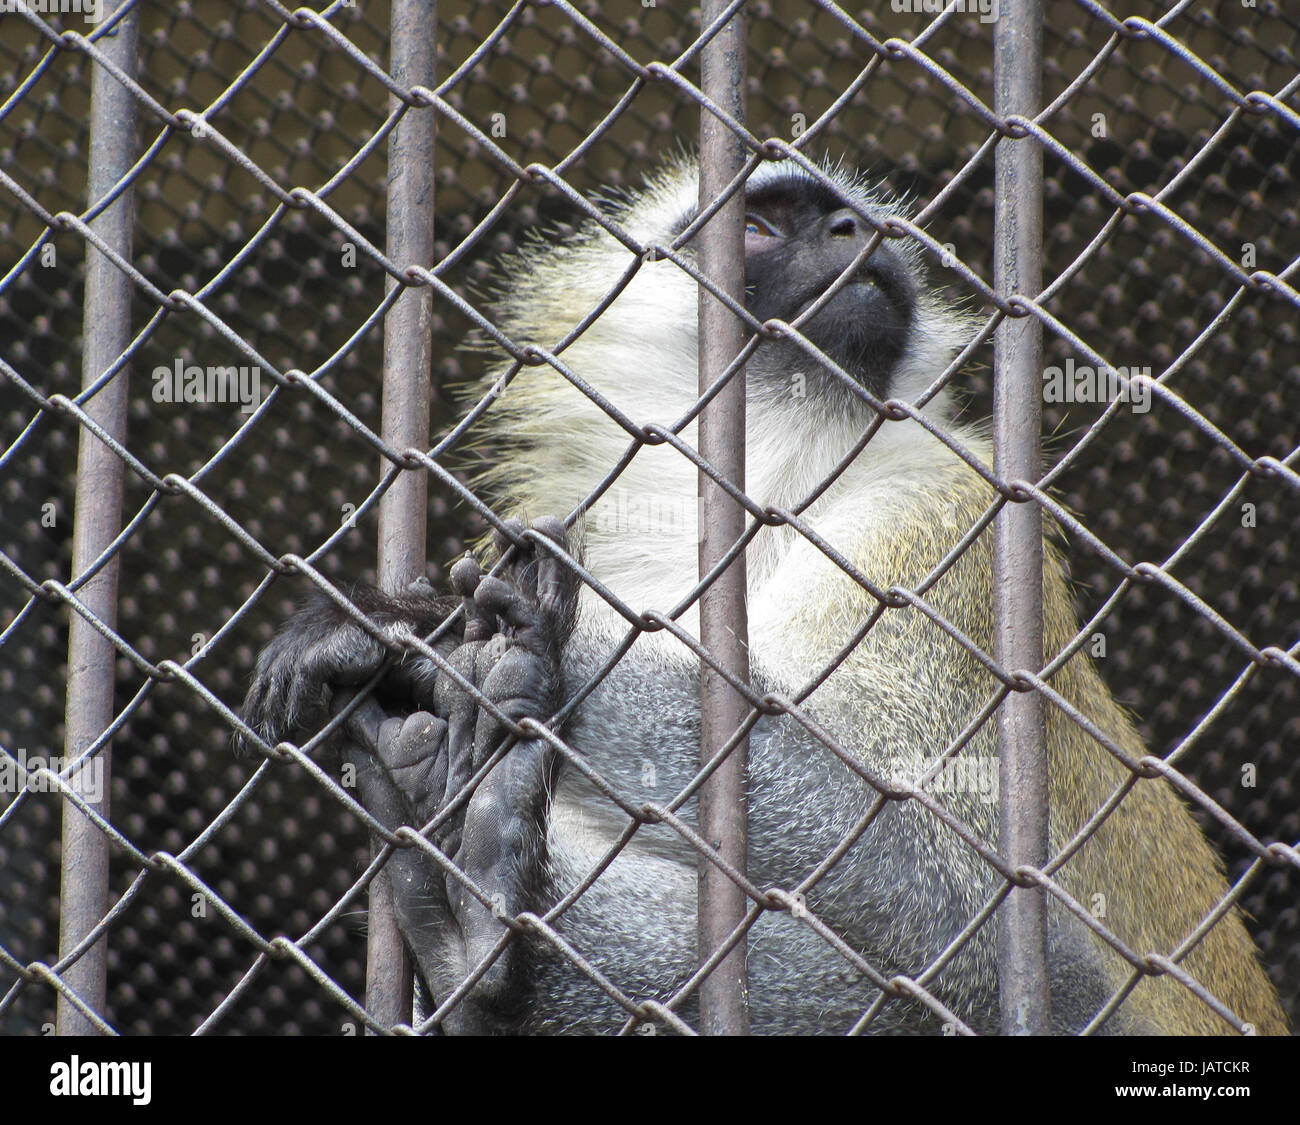 The monkey is behind bars Stock Photo